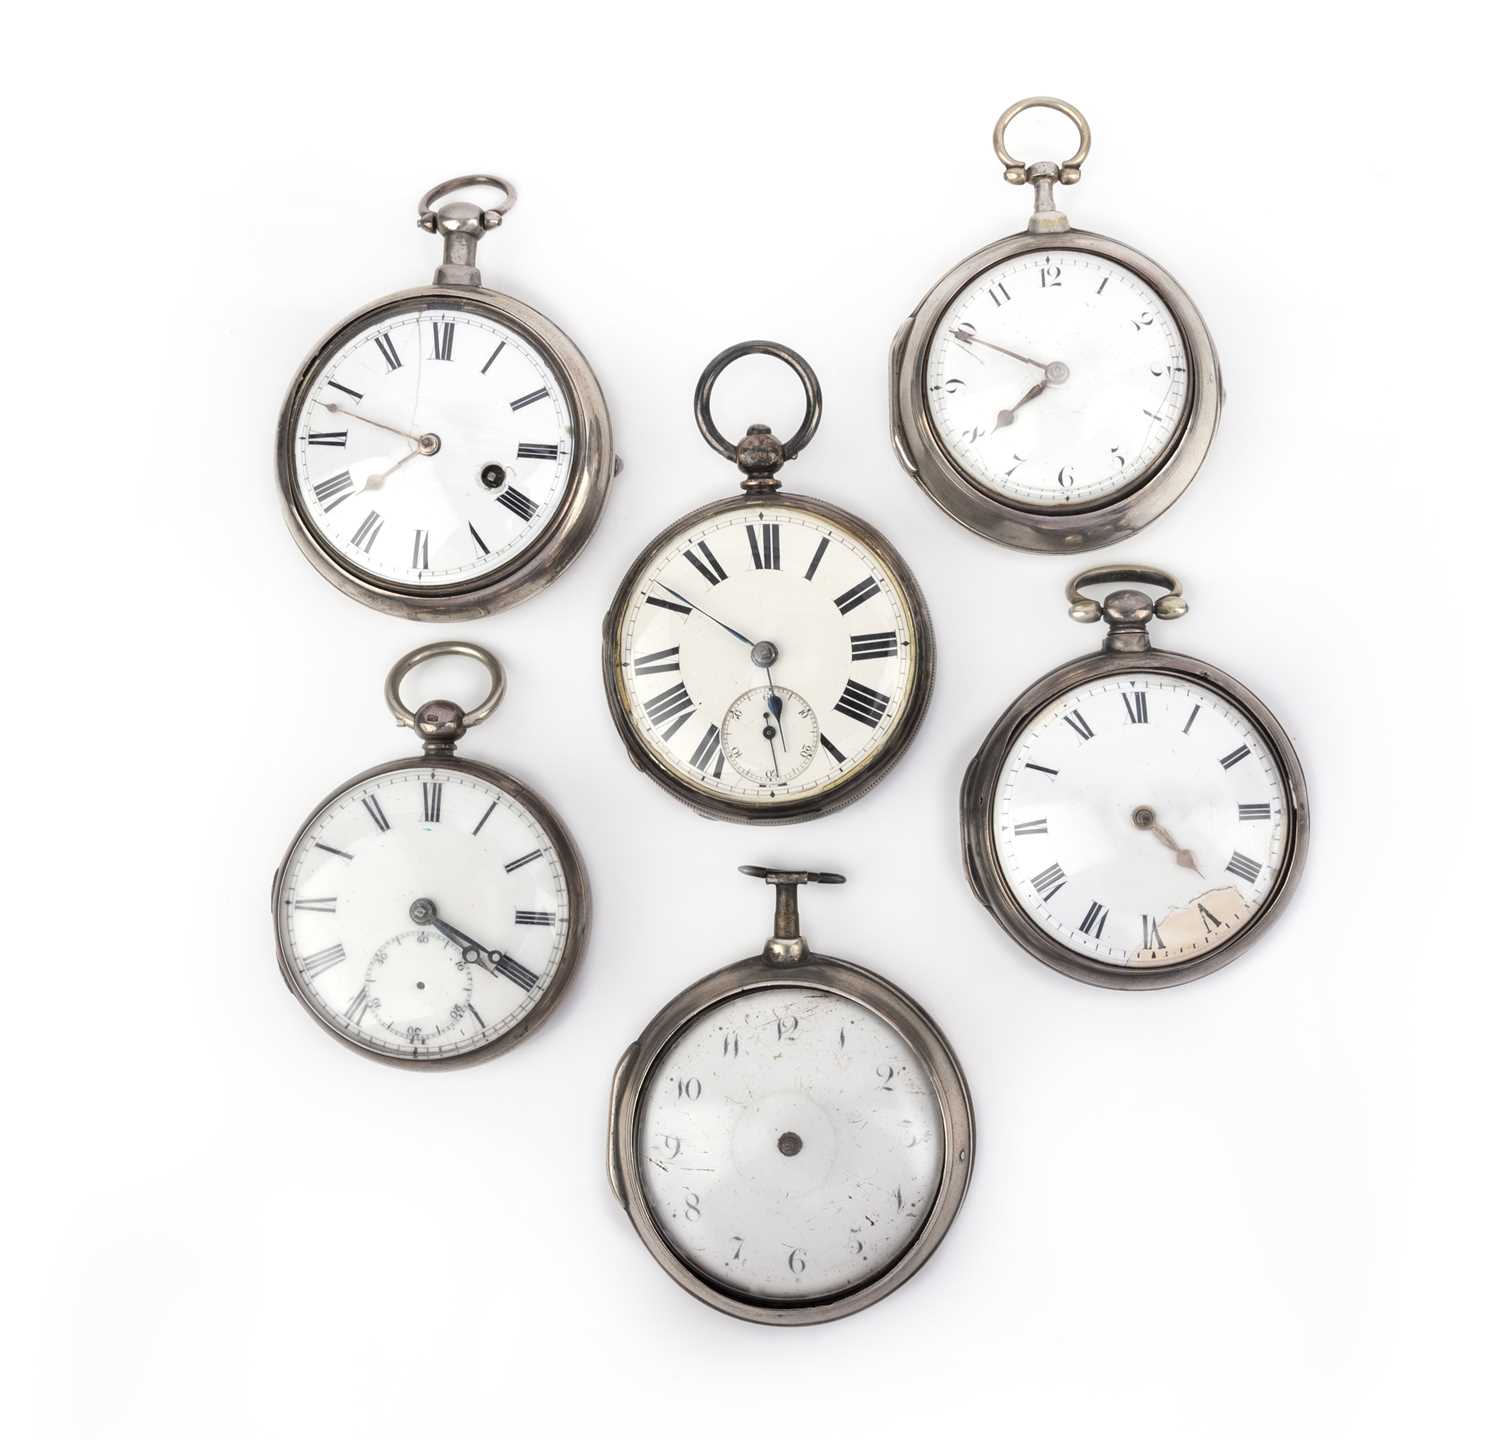 Six silver pair and single cased pocket watches, in various states of repair, comprising: